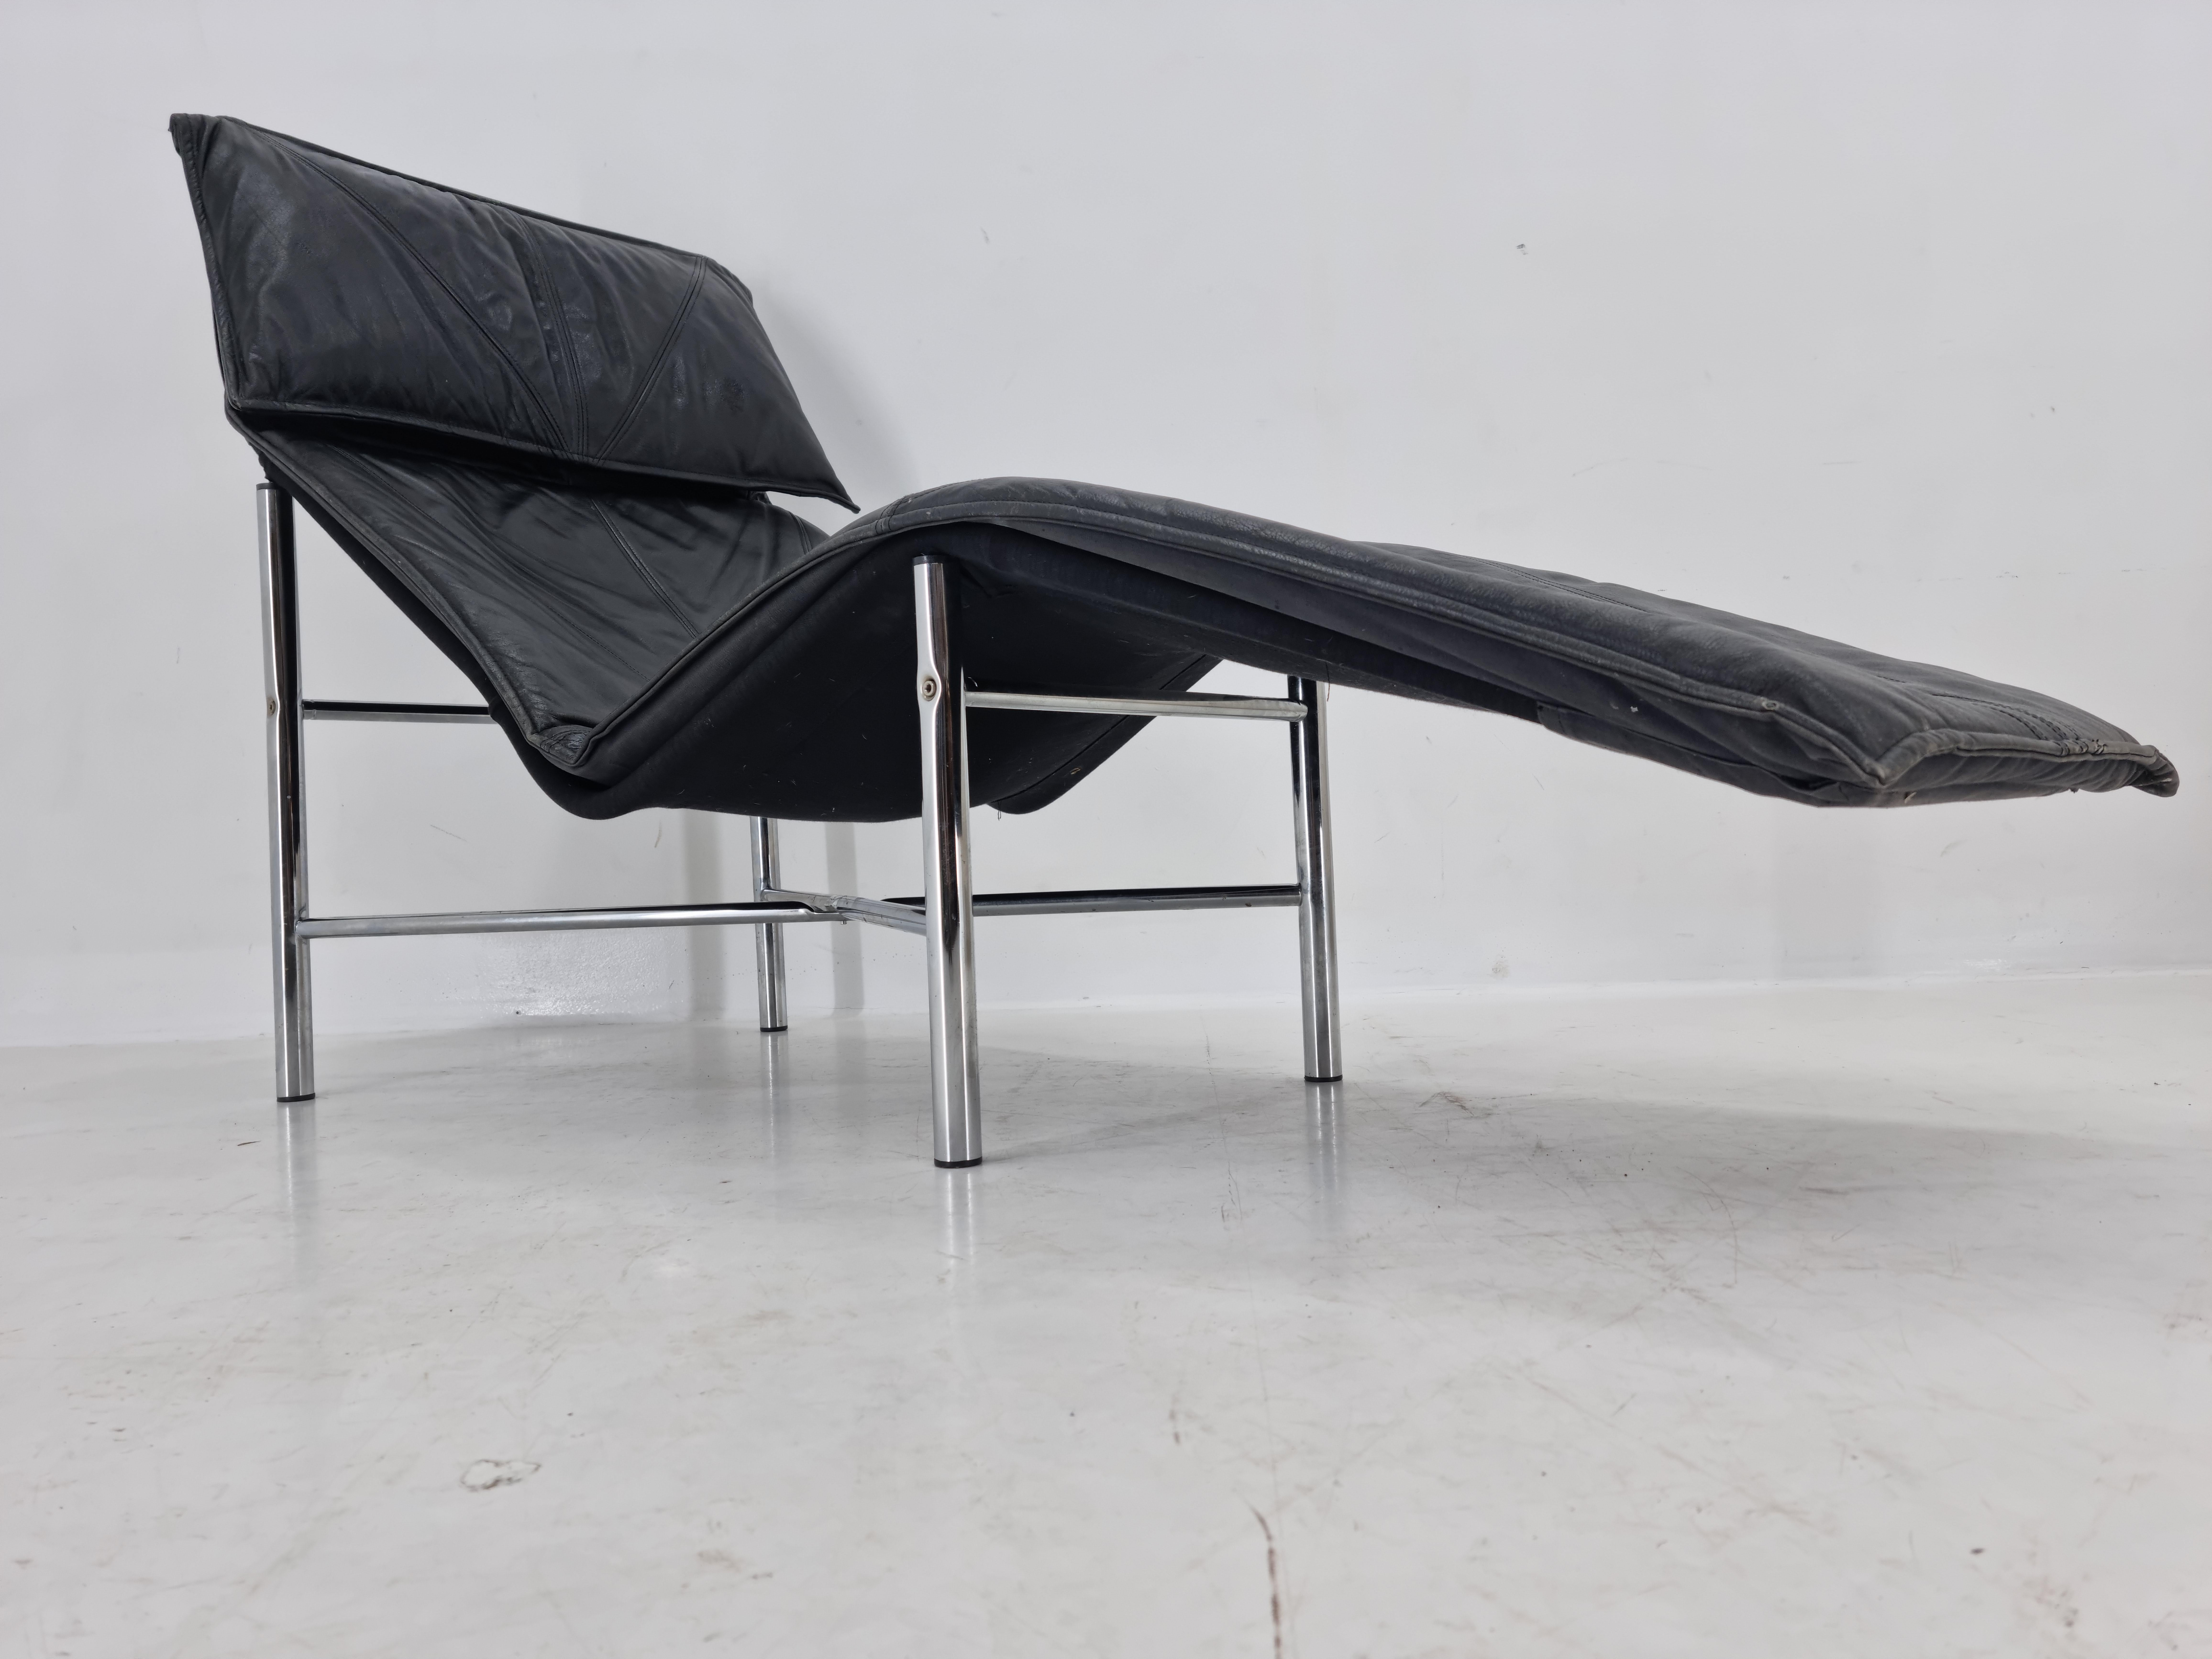 Leather Midcentury Skye Chaise Lounge Chair for IKEA by Tord Björklund, Sweden, 1970s For Sale